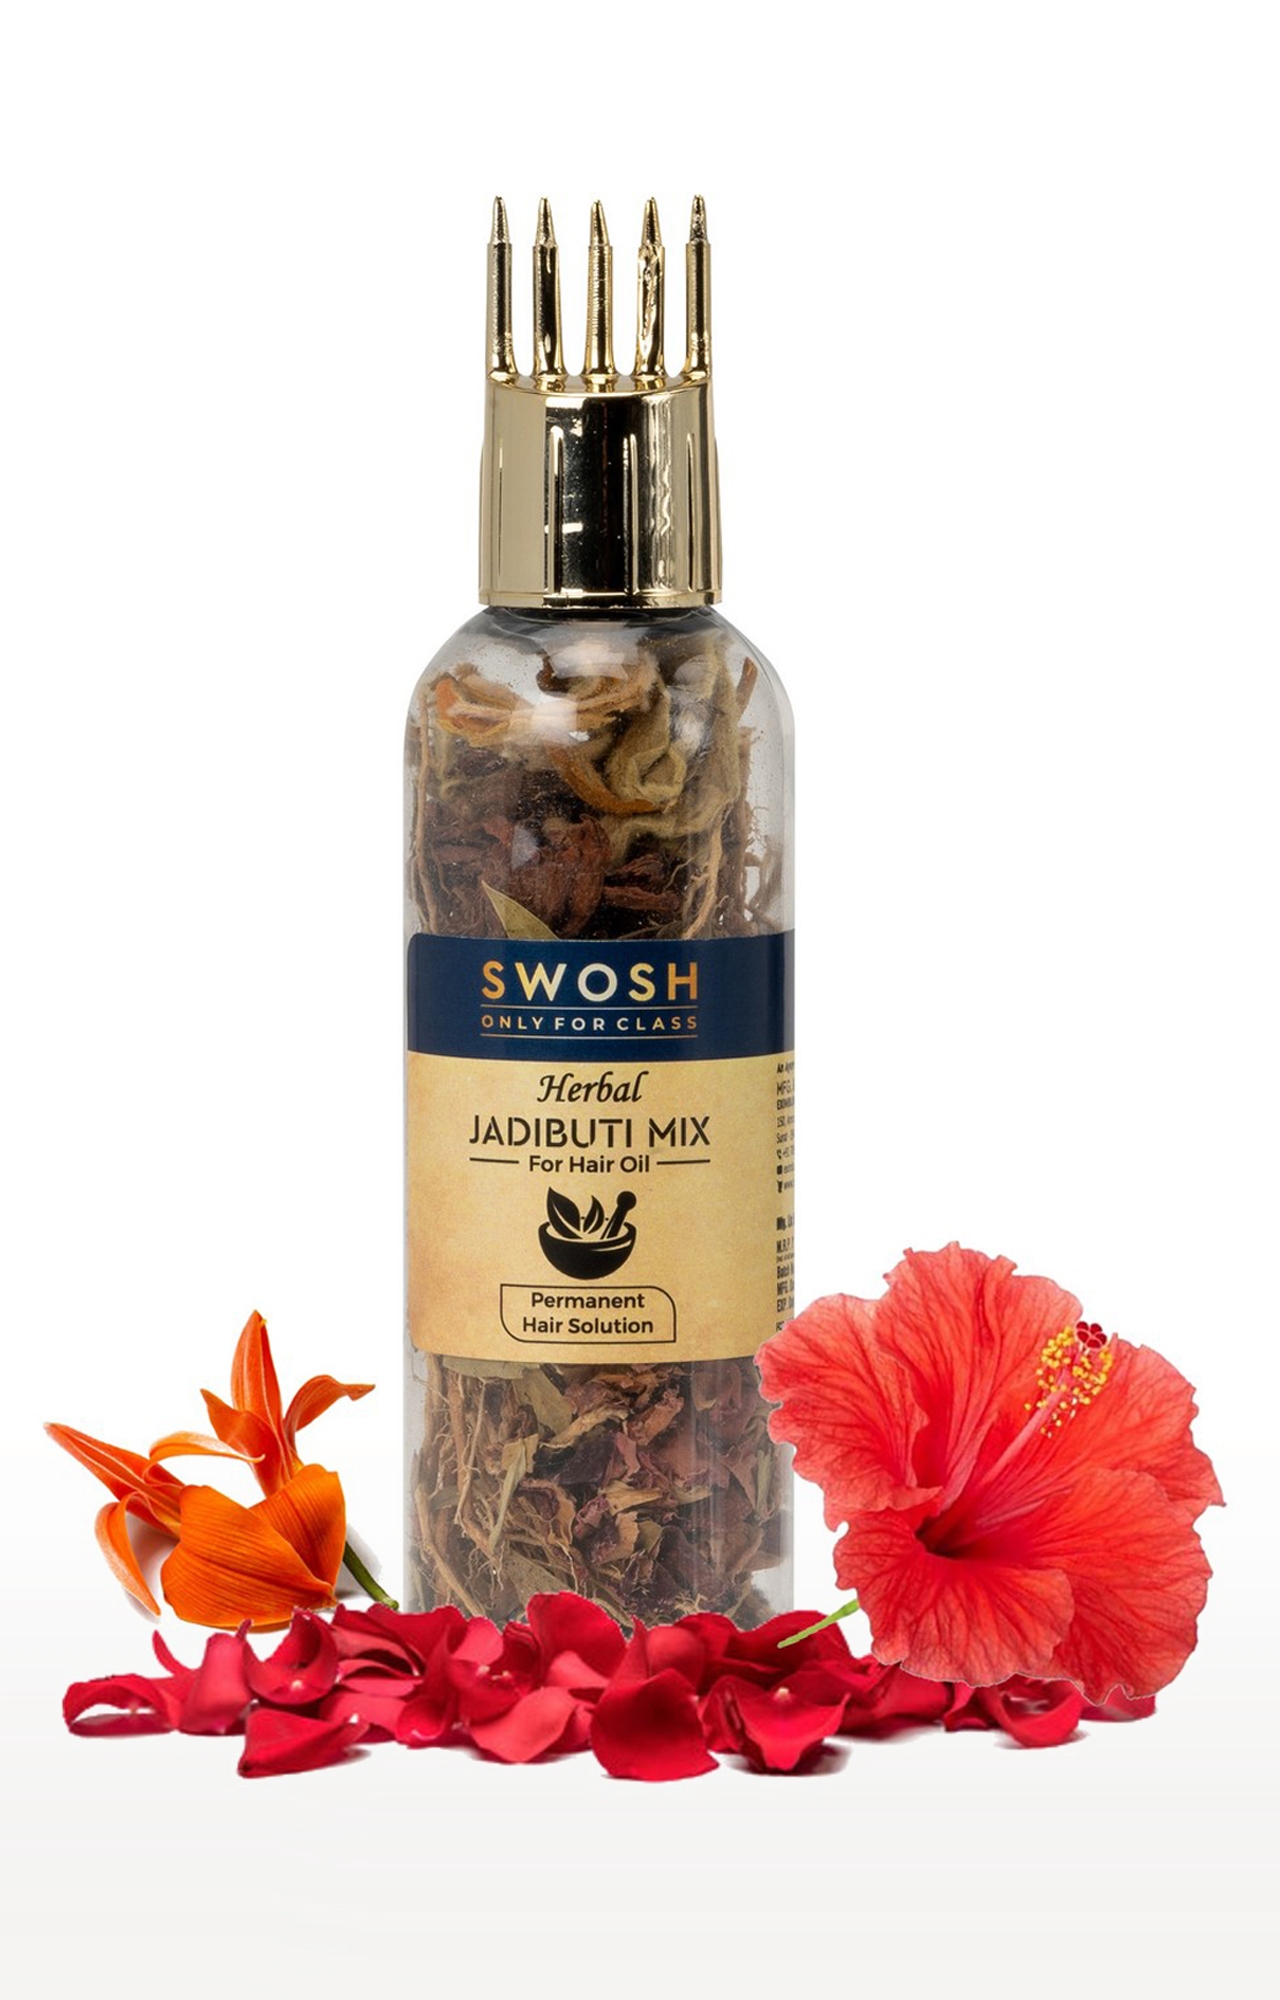 SWOSH | Swosh Ayurvedic Herbal Hair Oil Mix Bottle For Healthy Hair Growth Packed With Goodness Of Ayurvedic Natural Dried Herbs For Oil Infusion 10G